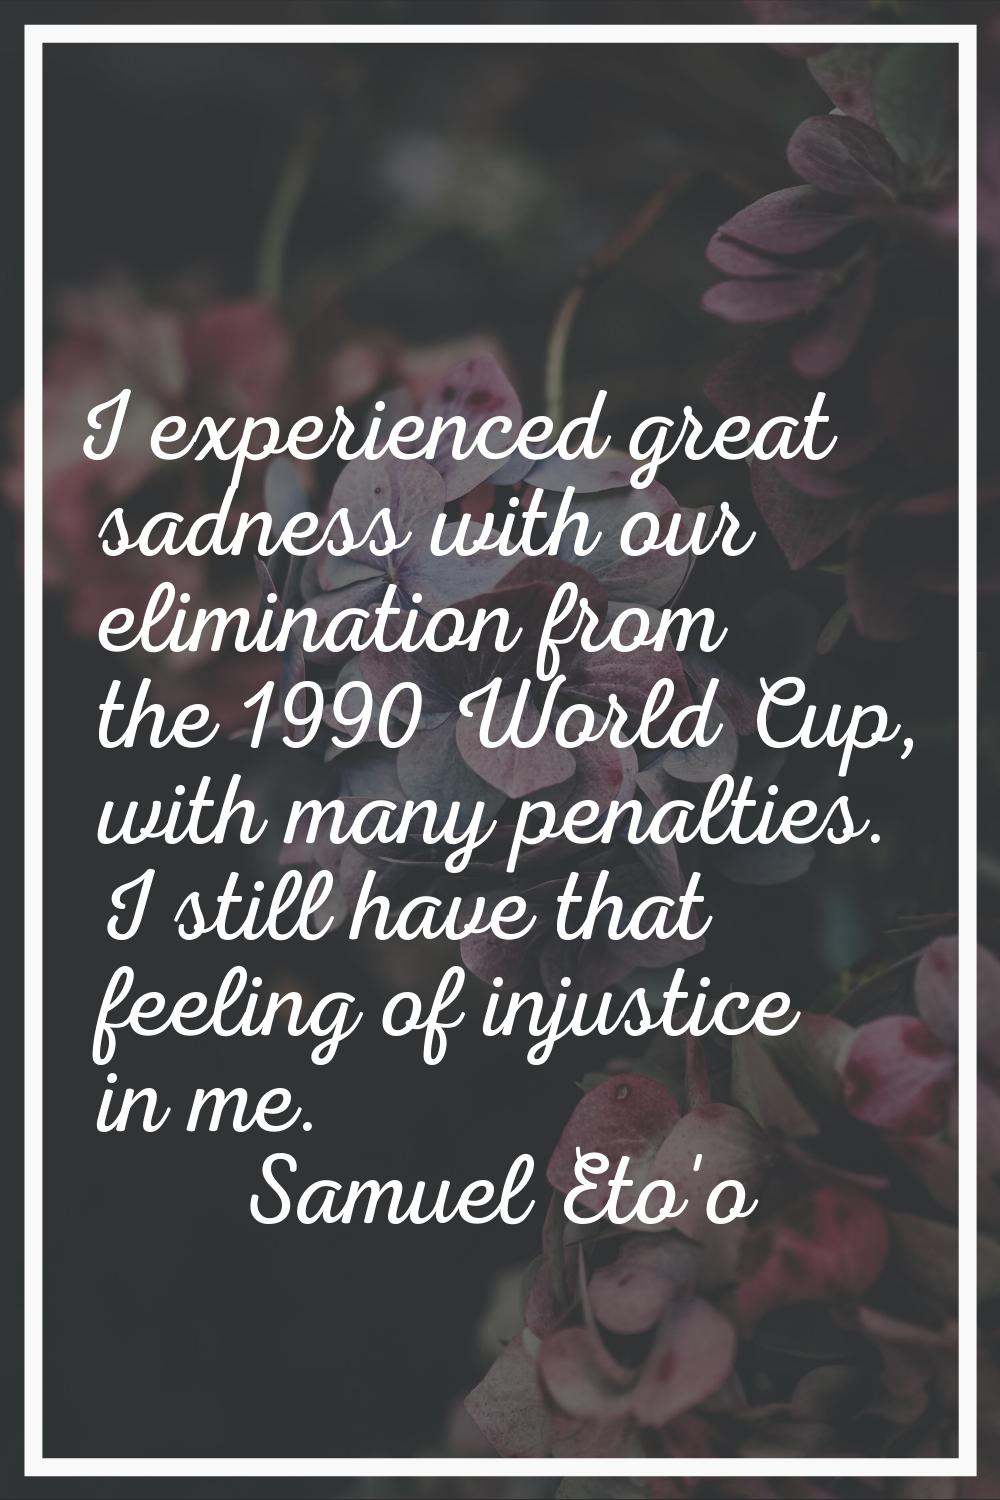 I experienced great sadness with our elimination from the 1990 World Cup, with many penalties. I st